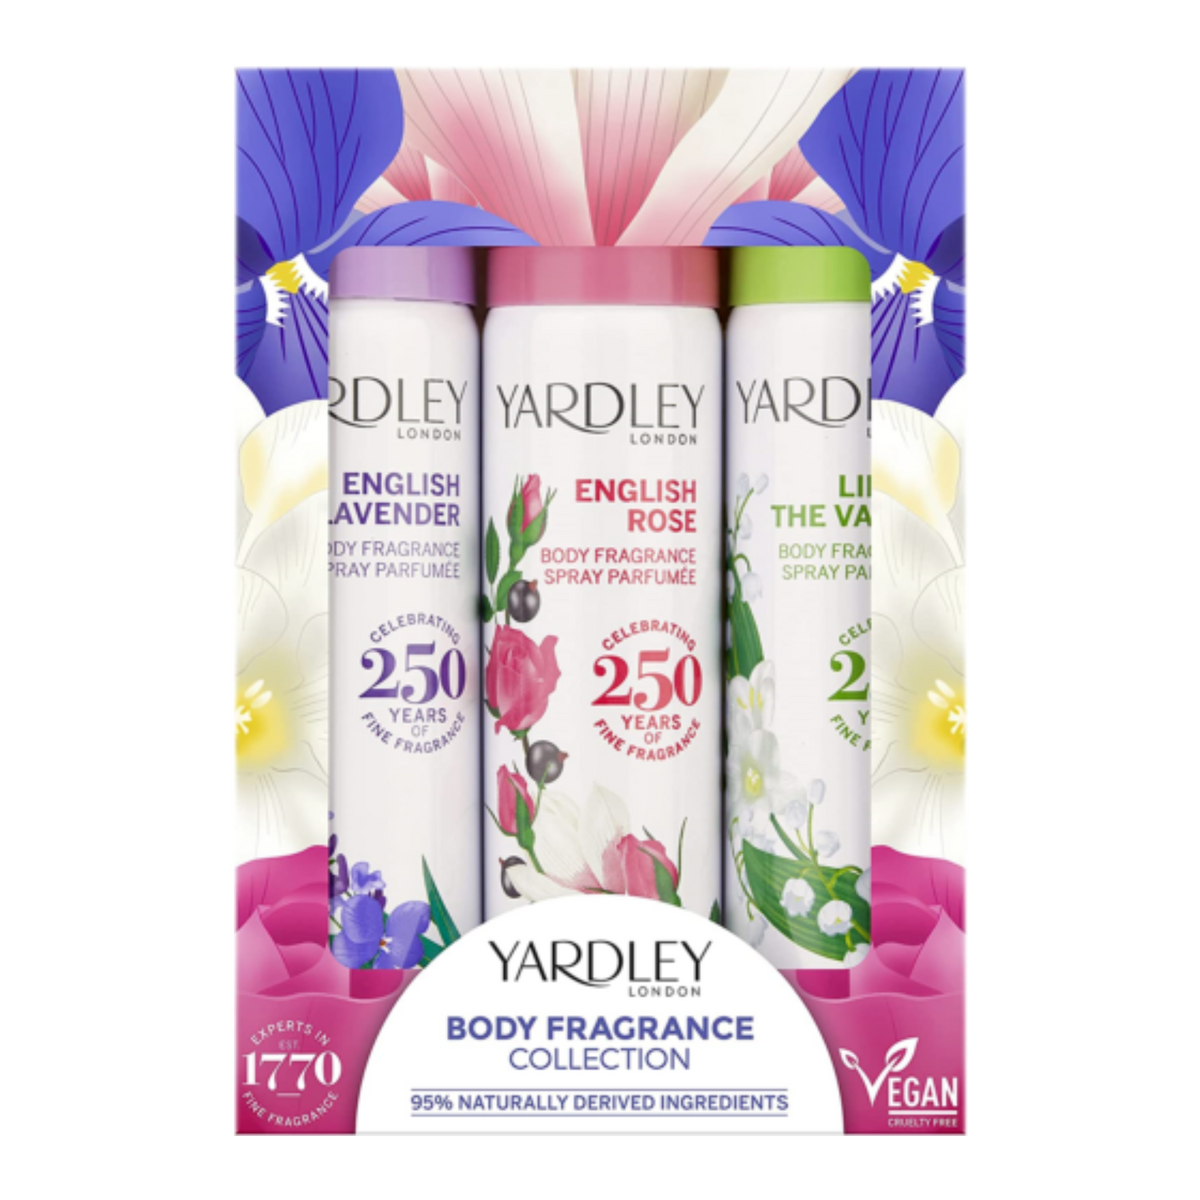 Primary Image of Yardley Body Fragrance Collection (3 x 75ml)